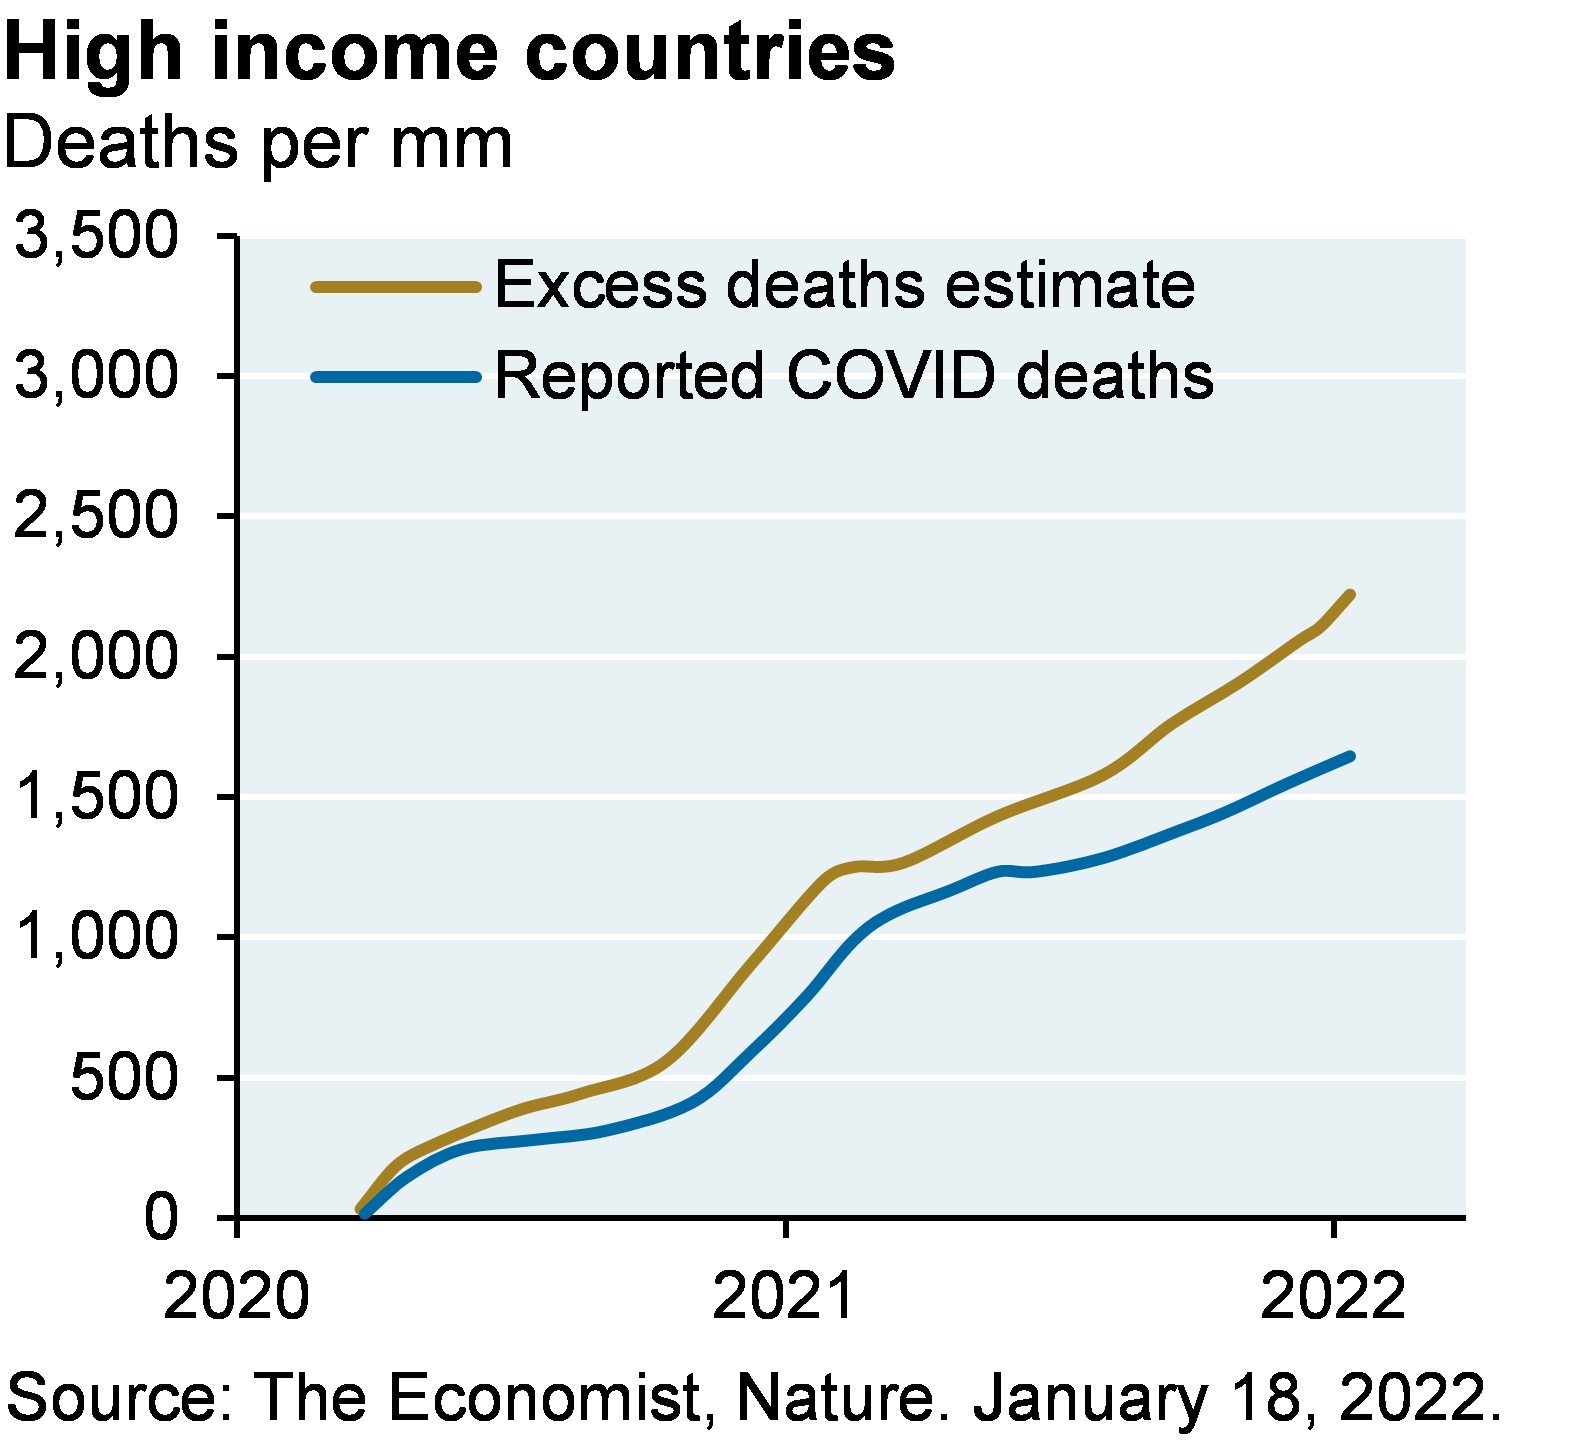 Line chart shows an excess deaths estimate vs reported COVID deaths among high income countries, shown as deaths per mm. Chart shows excess deaths are estimated slightly above 2,000 per mm, with reported COVID deaths slightly above 1,500 per mm at the latest point.